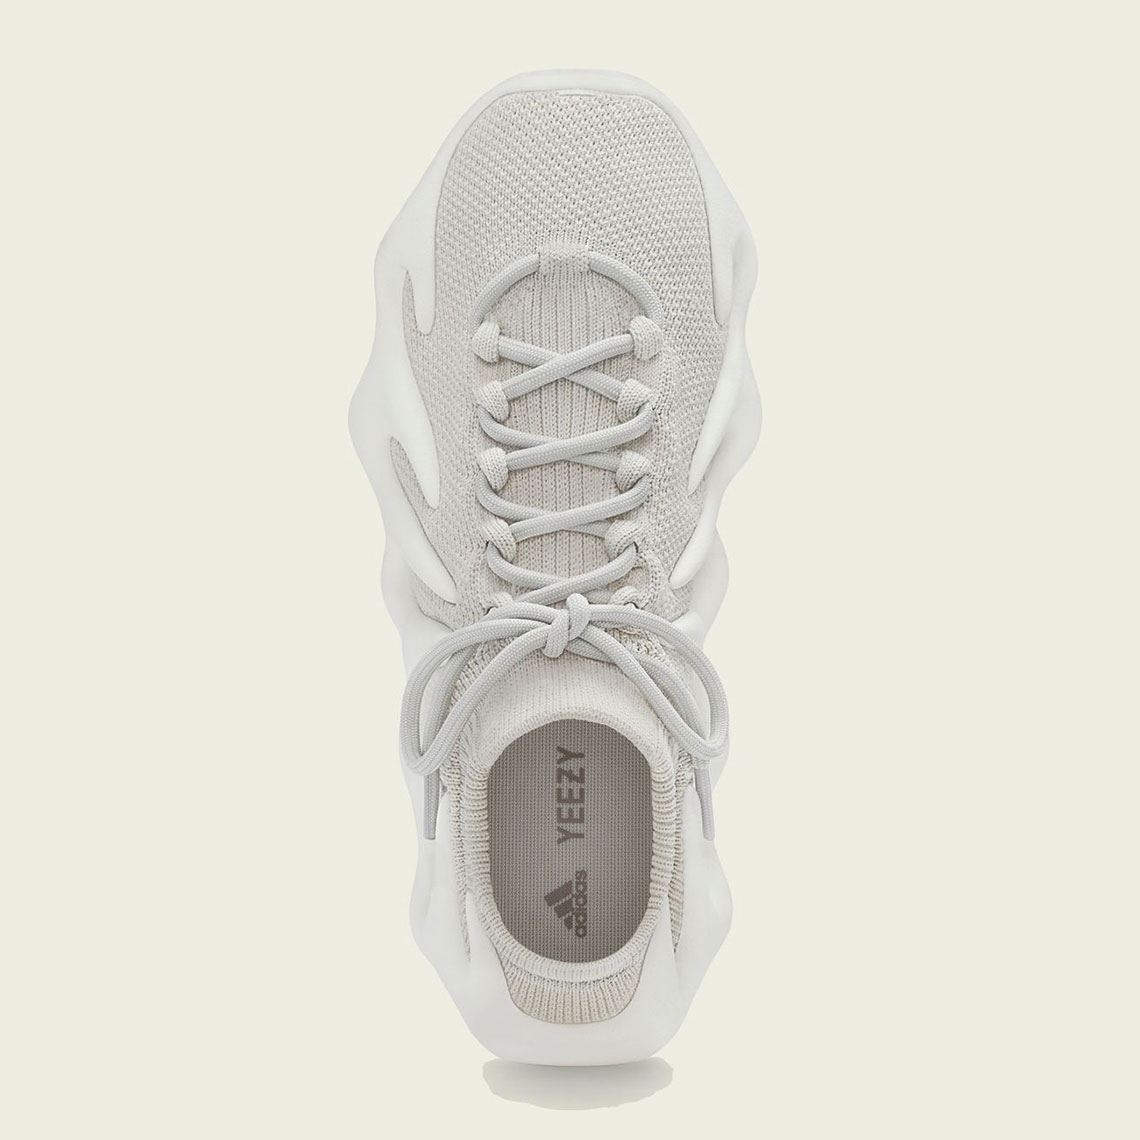 yeezy-450-cloud-white-release-date-price-where-to-buy-3